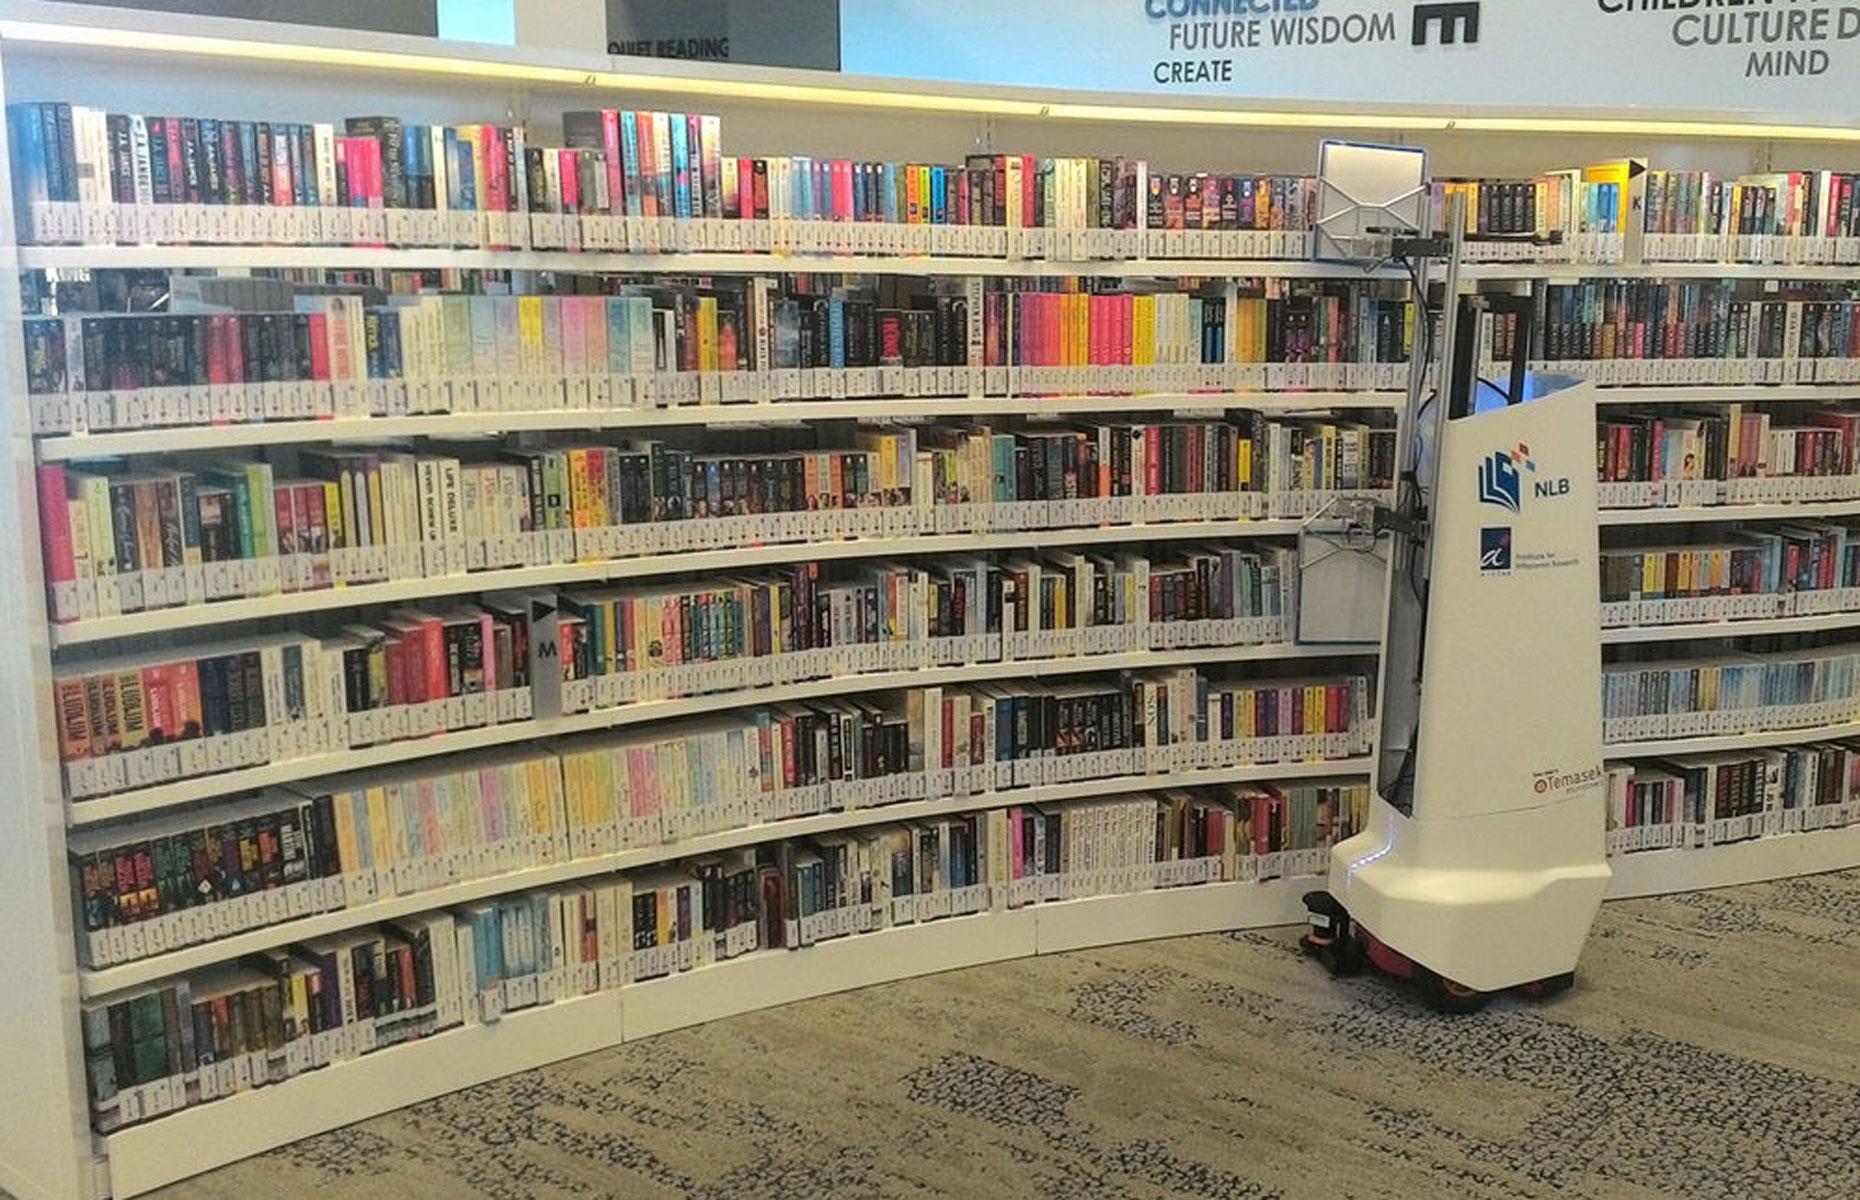 <p>Researchers at Singapore's Agency for Science, Technology and Research (A*STAR) have developed a robotic librarian that laser-scans shelves and can tell which books are missing or misplaced.</p>  <p>Tracking down misplaced books and tidying shelves are major parts of the average librarian's daily grind, so this machine has the potential to replace a significant number of jobs.</p>  <p><strong>Now take a look at some <a href="https://www.lovemoney.com/news/76999/old-products-you-thought-had-disappeared-but-people-still-use-today">old products you thought had disappeared but people still use</a></strong></p>